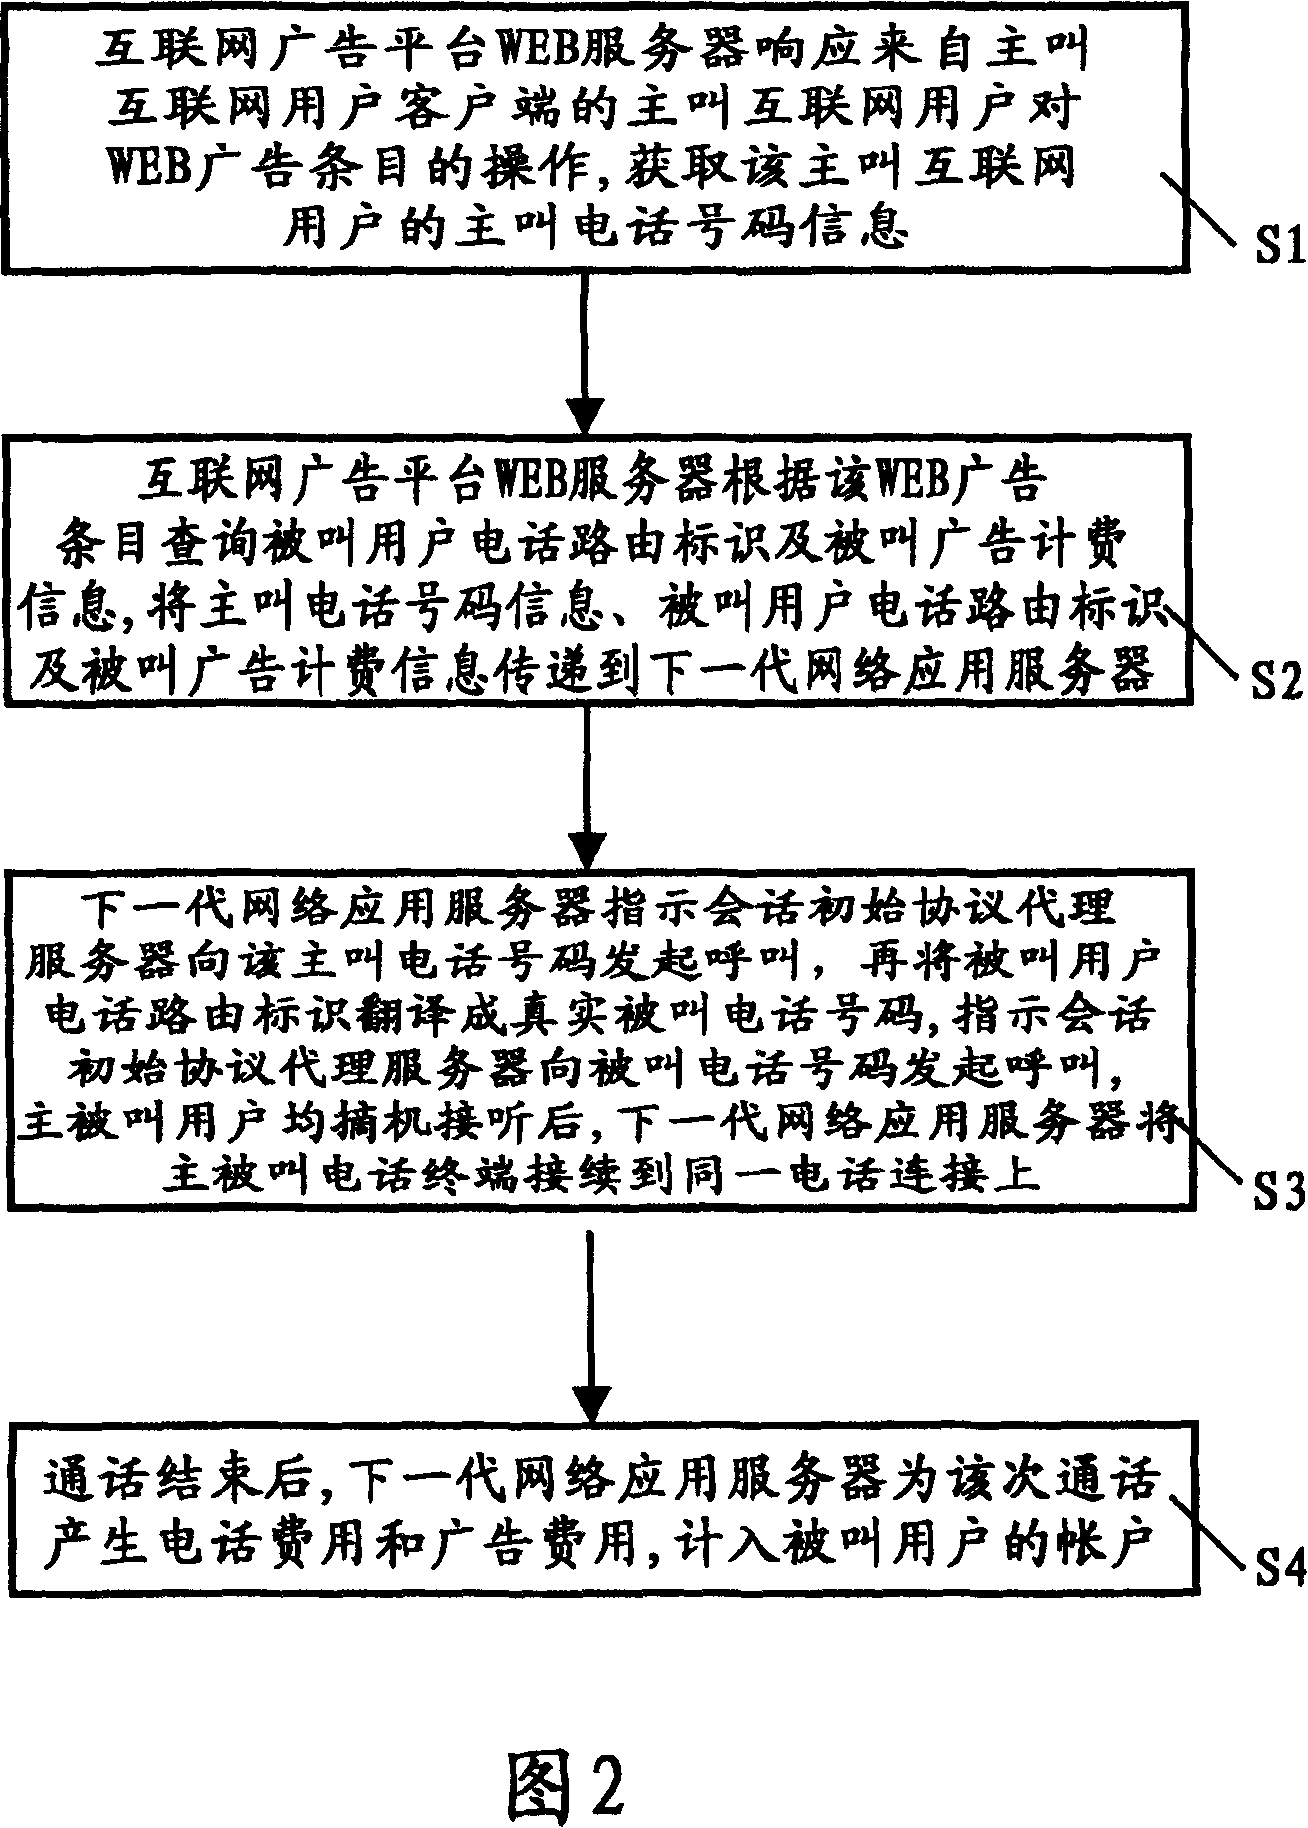 Method and system for implementing internet advertisement telephone